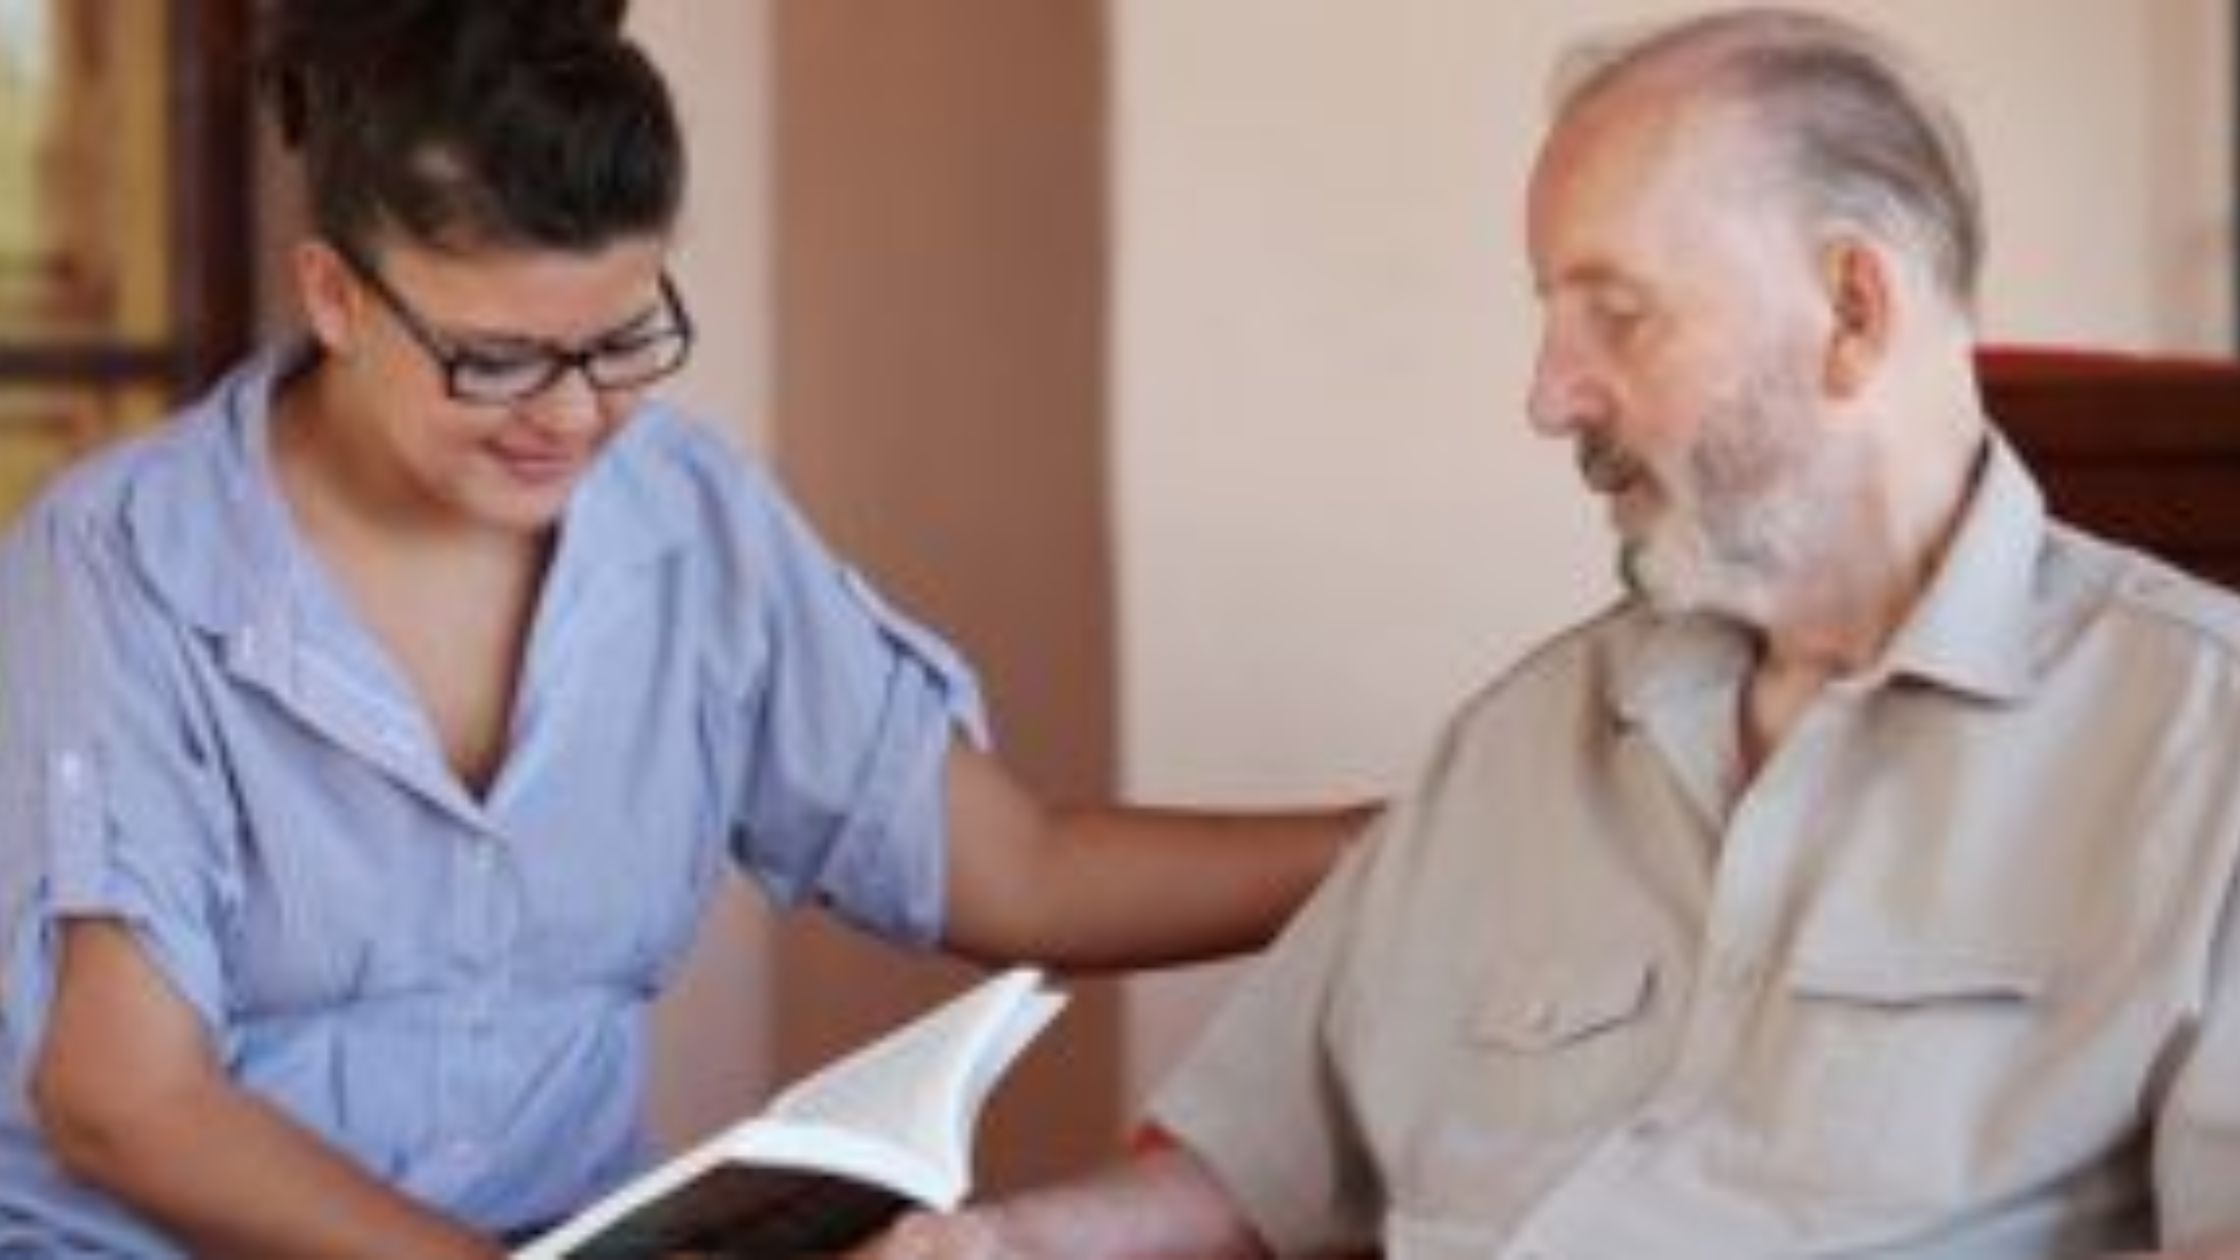 The Blessing of Elderly Care Services for Families